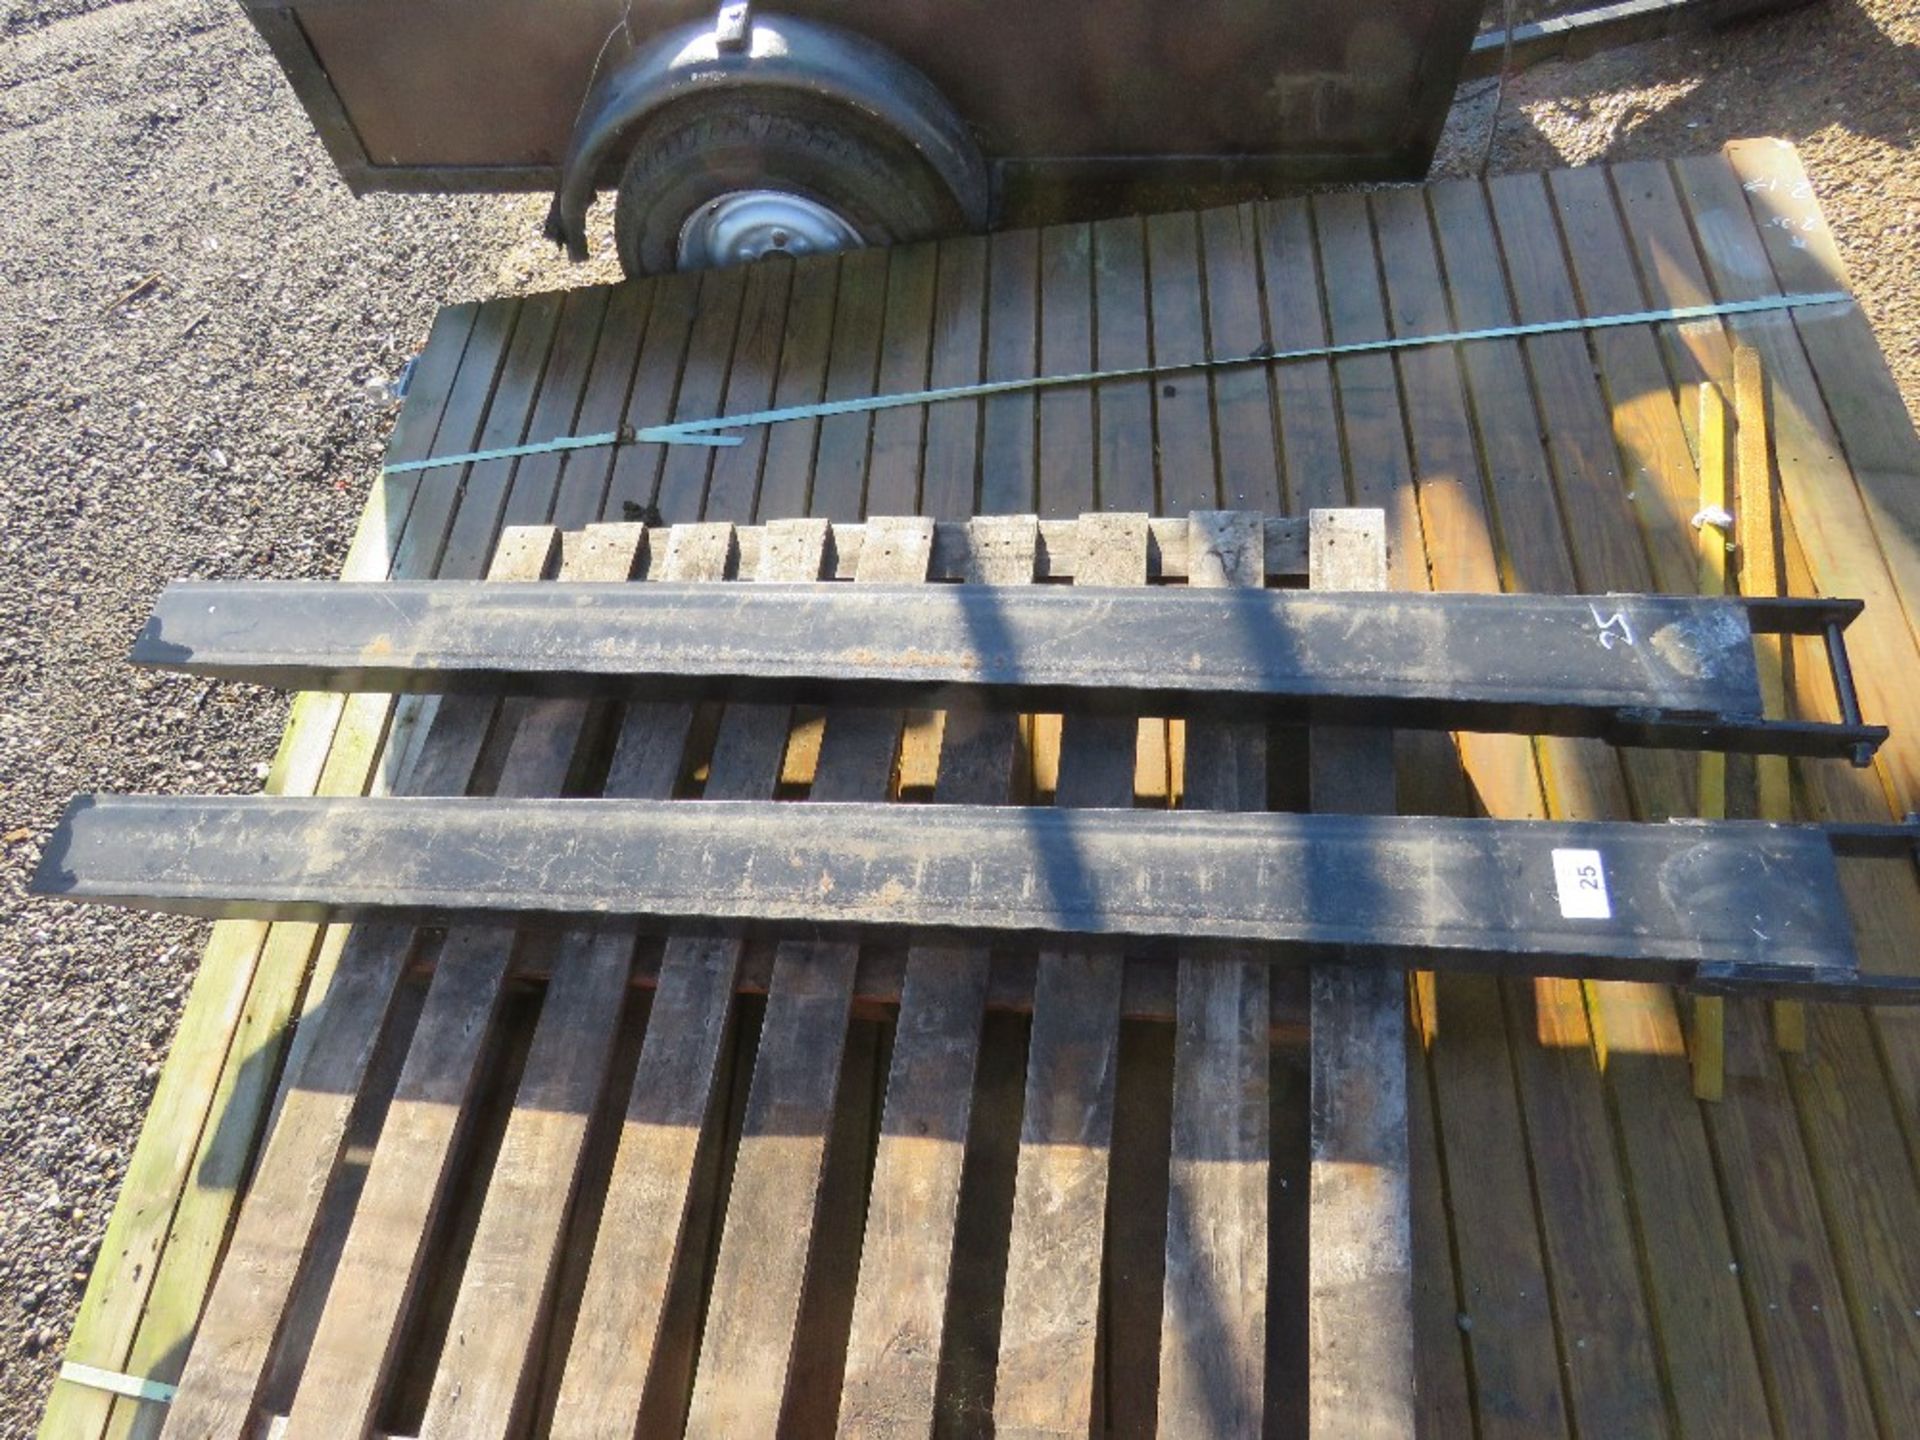 PAIR OF 6FT LENGTH FORKLIFT EXTENSION FORK TINES / SLEEVES. 5" WIDTH, WITH LOCKING PINS. - Image 2 of 2